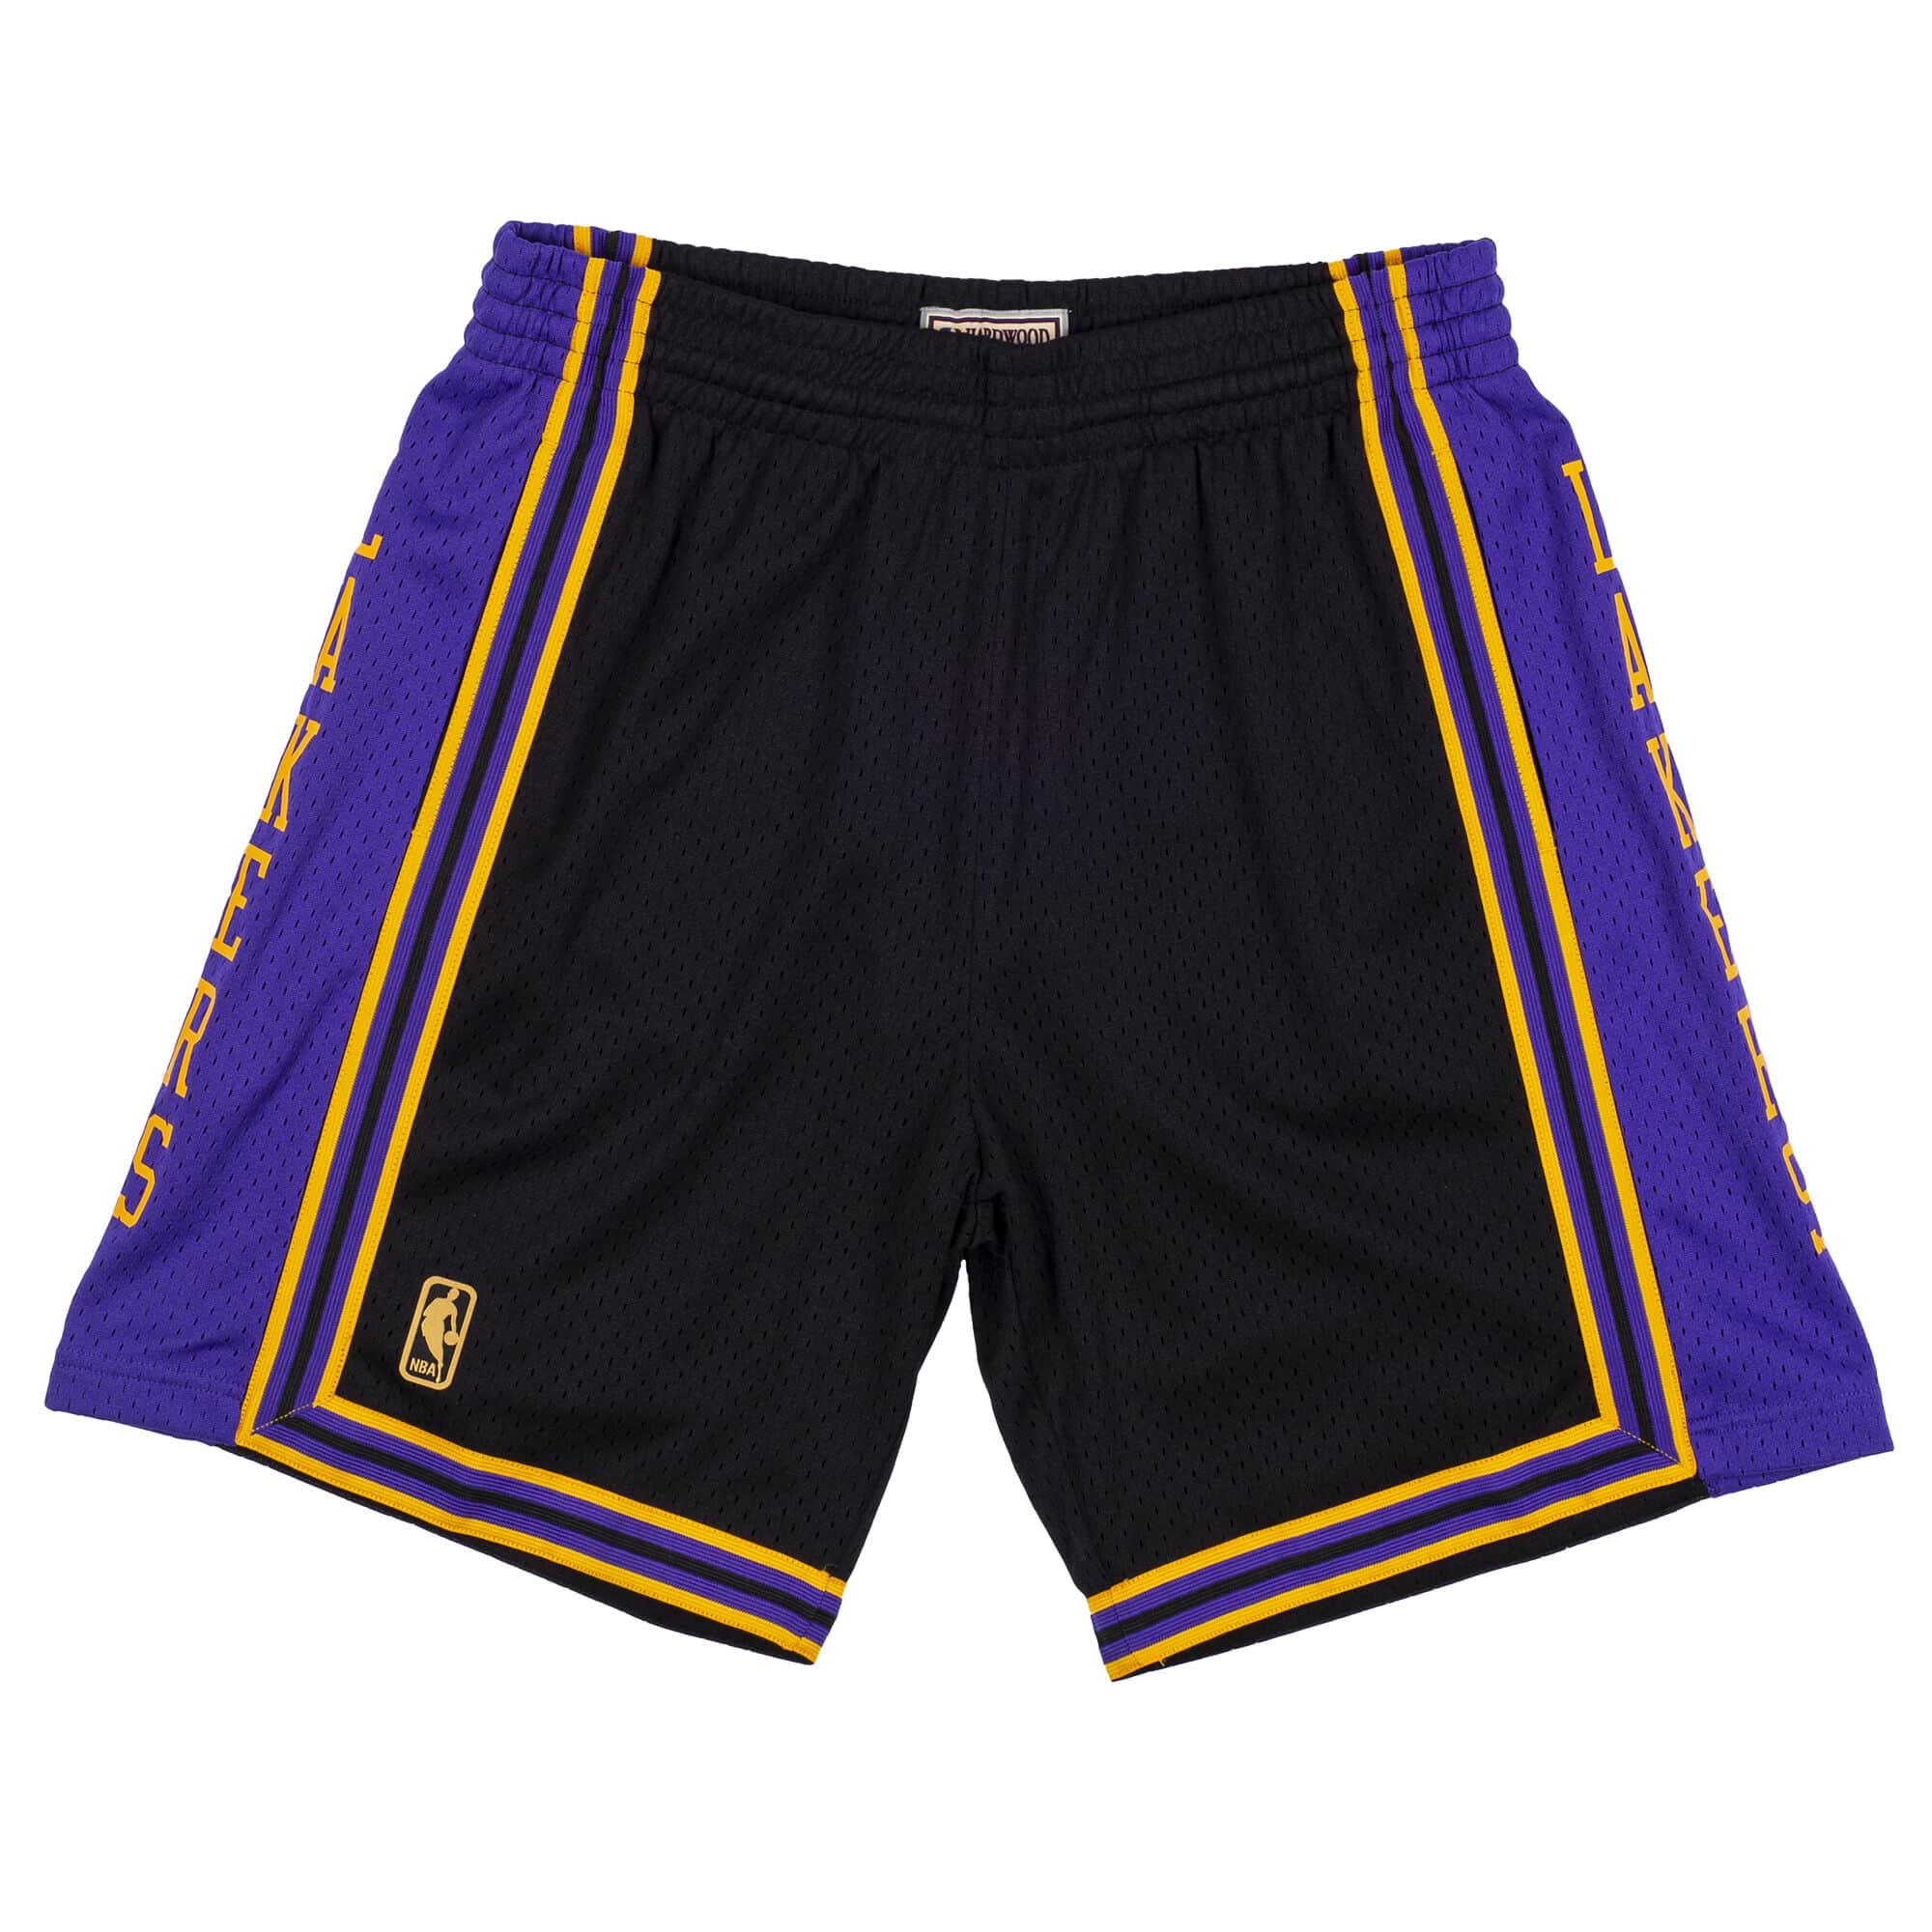 Los Angeles Lakers Mitchell & Ness 2009/2010 Hardwood Classics Authentic  Shorts - Blue/White